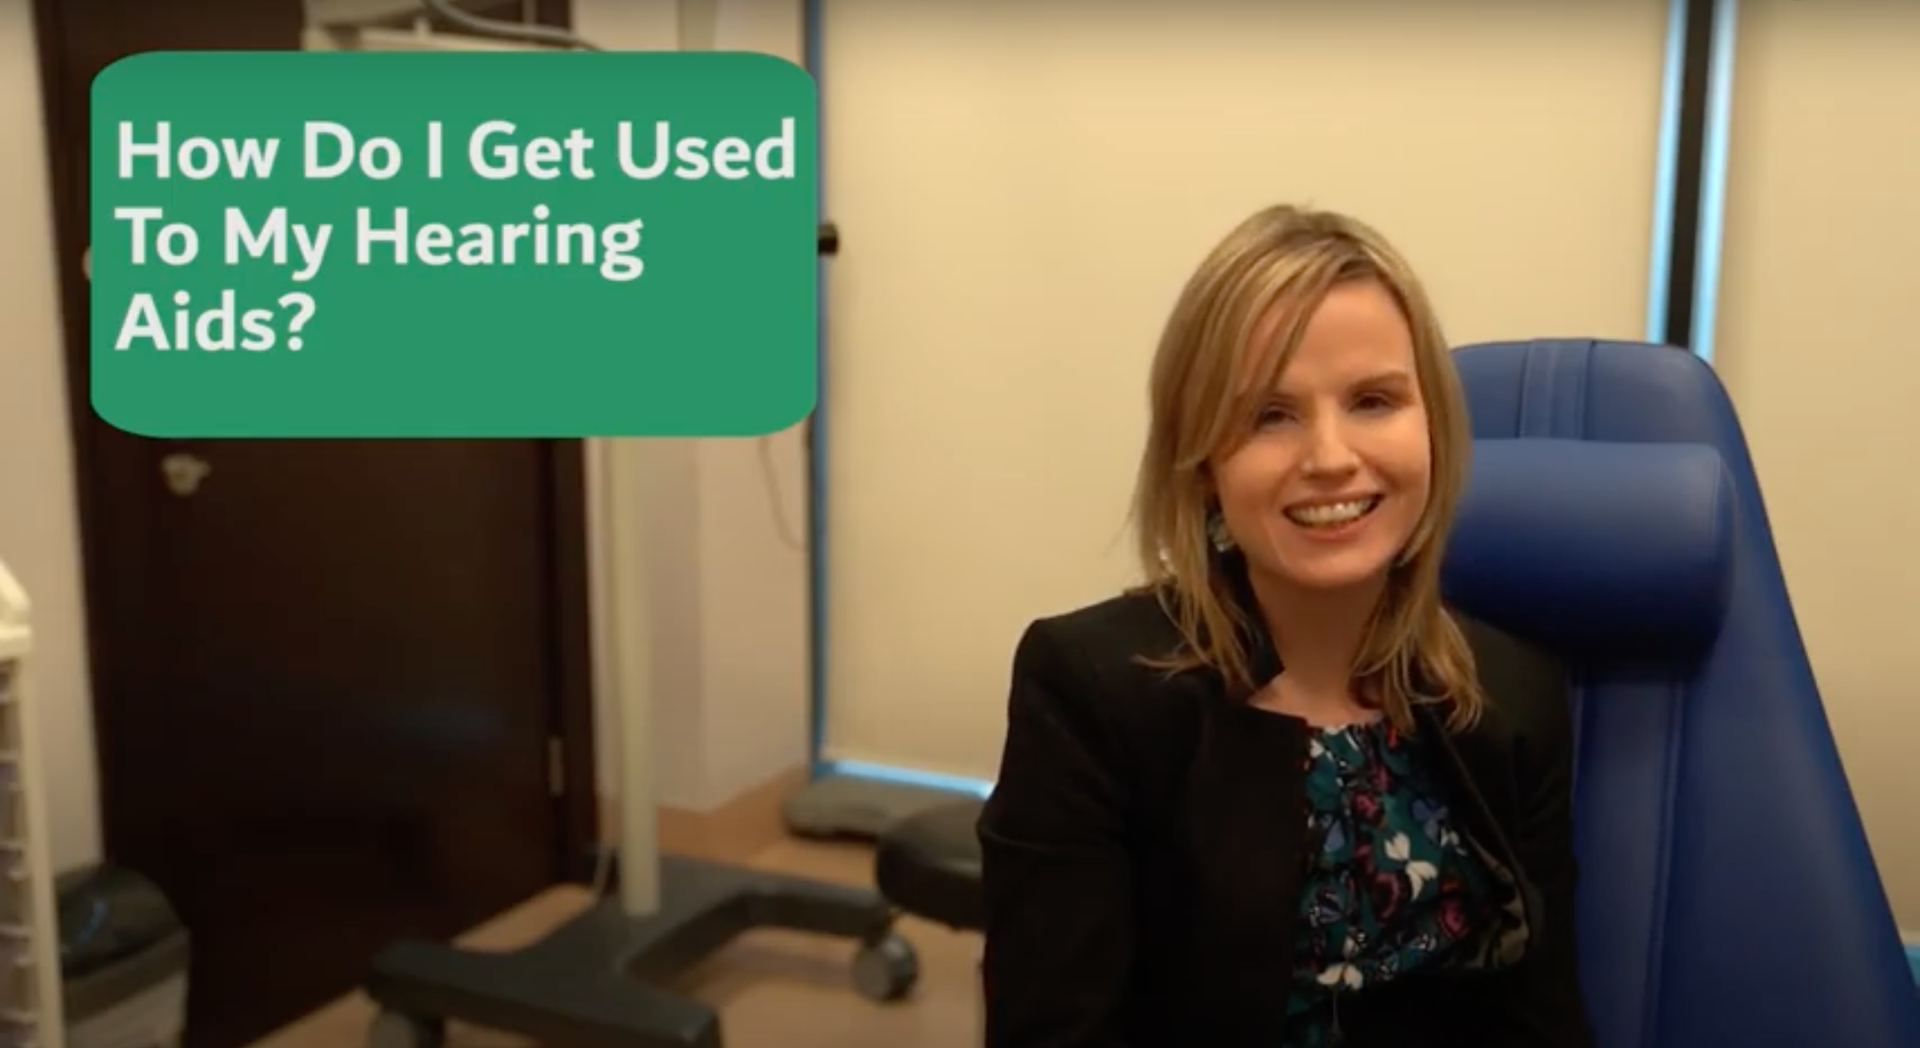 How do I get used to my hearing aids? Image